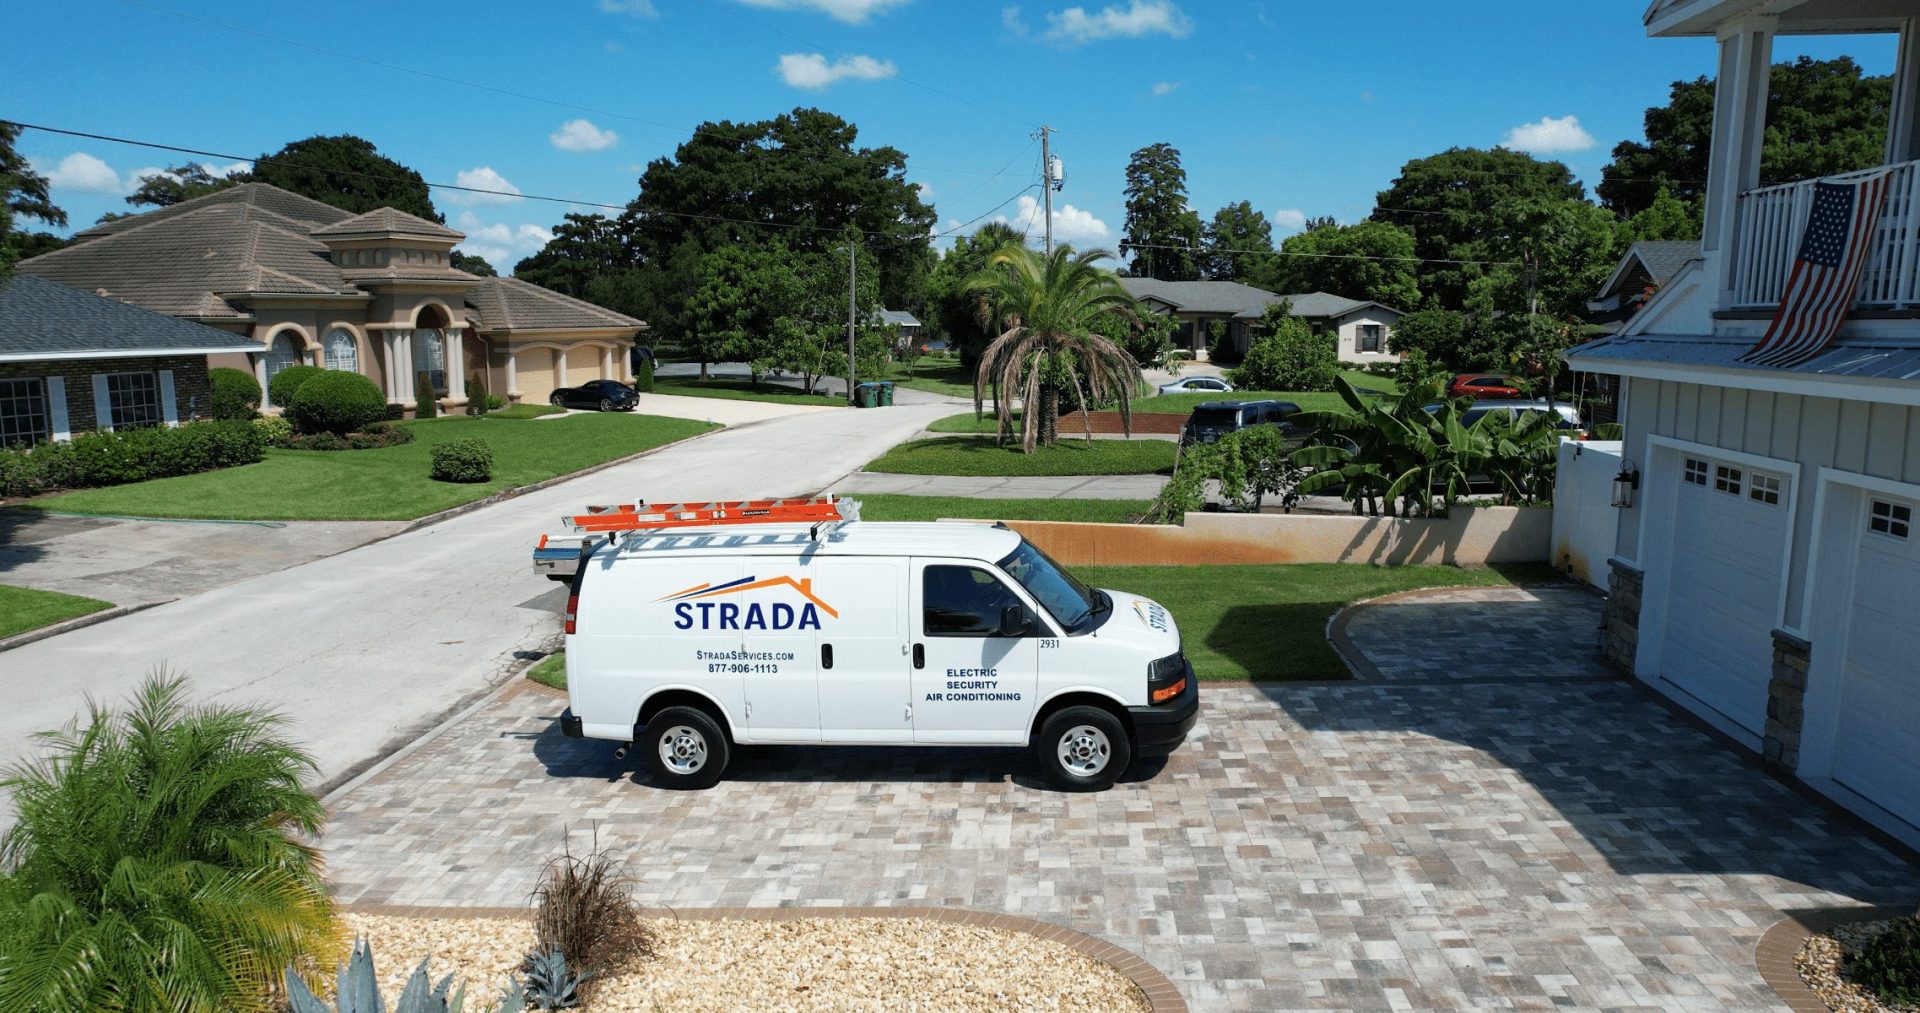 Strada Services truck parked outside residential home